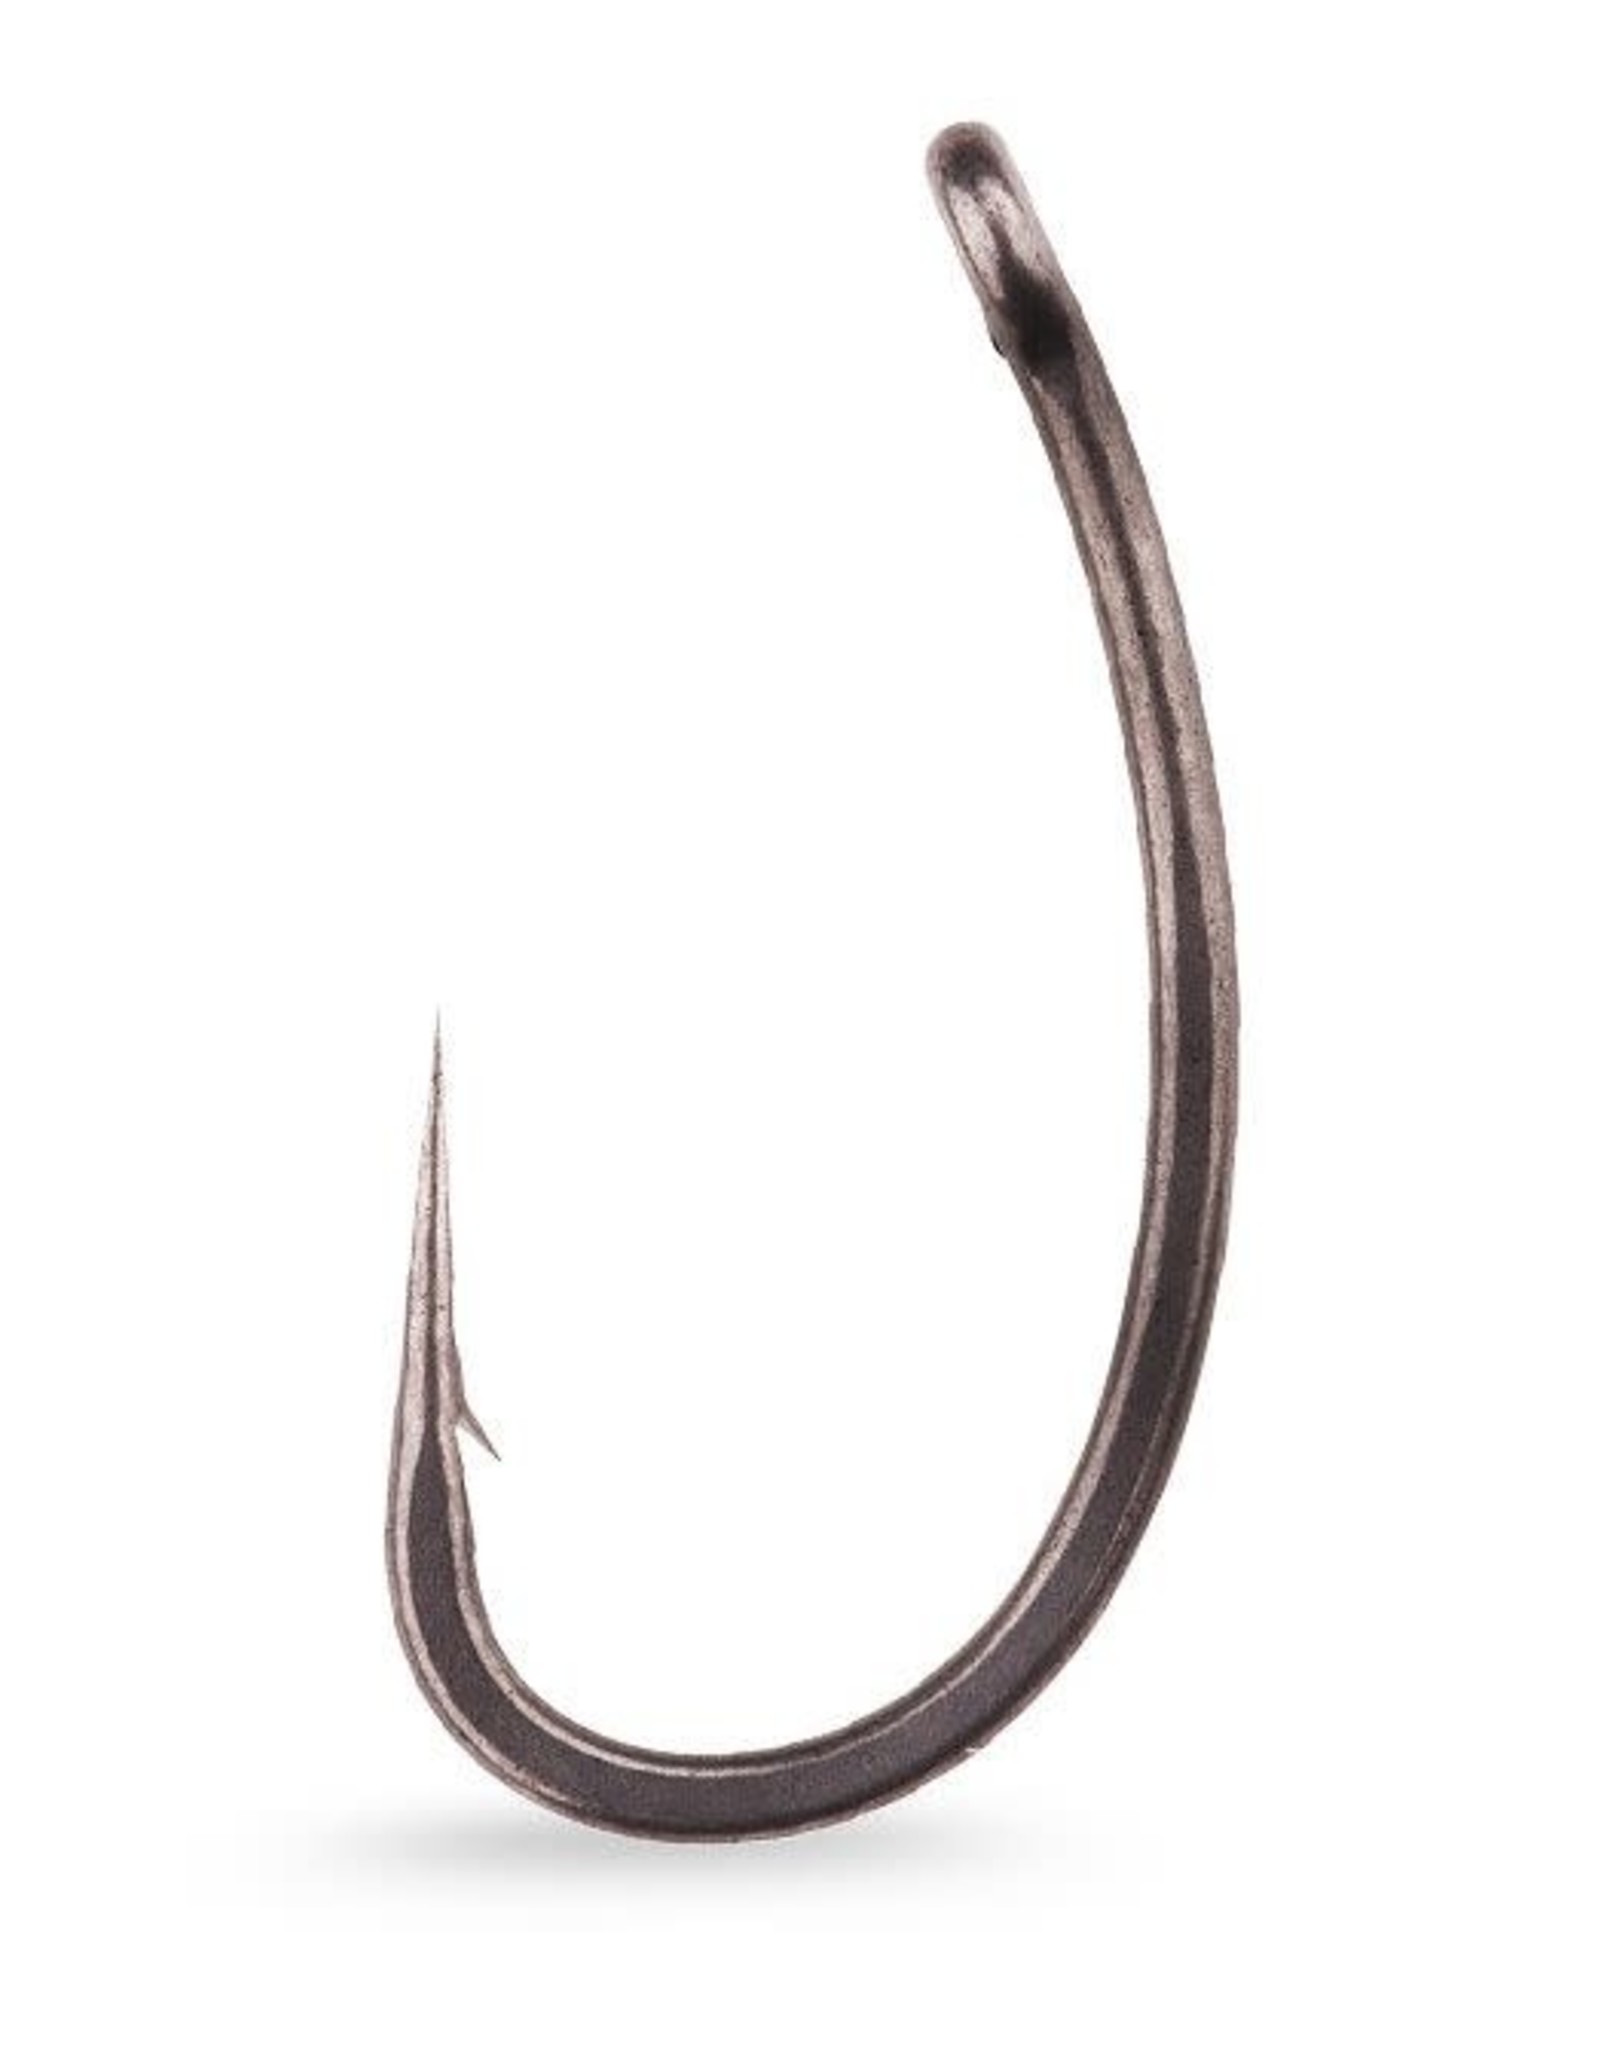 Pole position STRONGBOW HOOKS PTFE 10ST